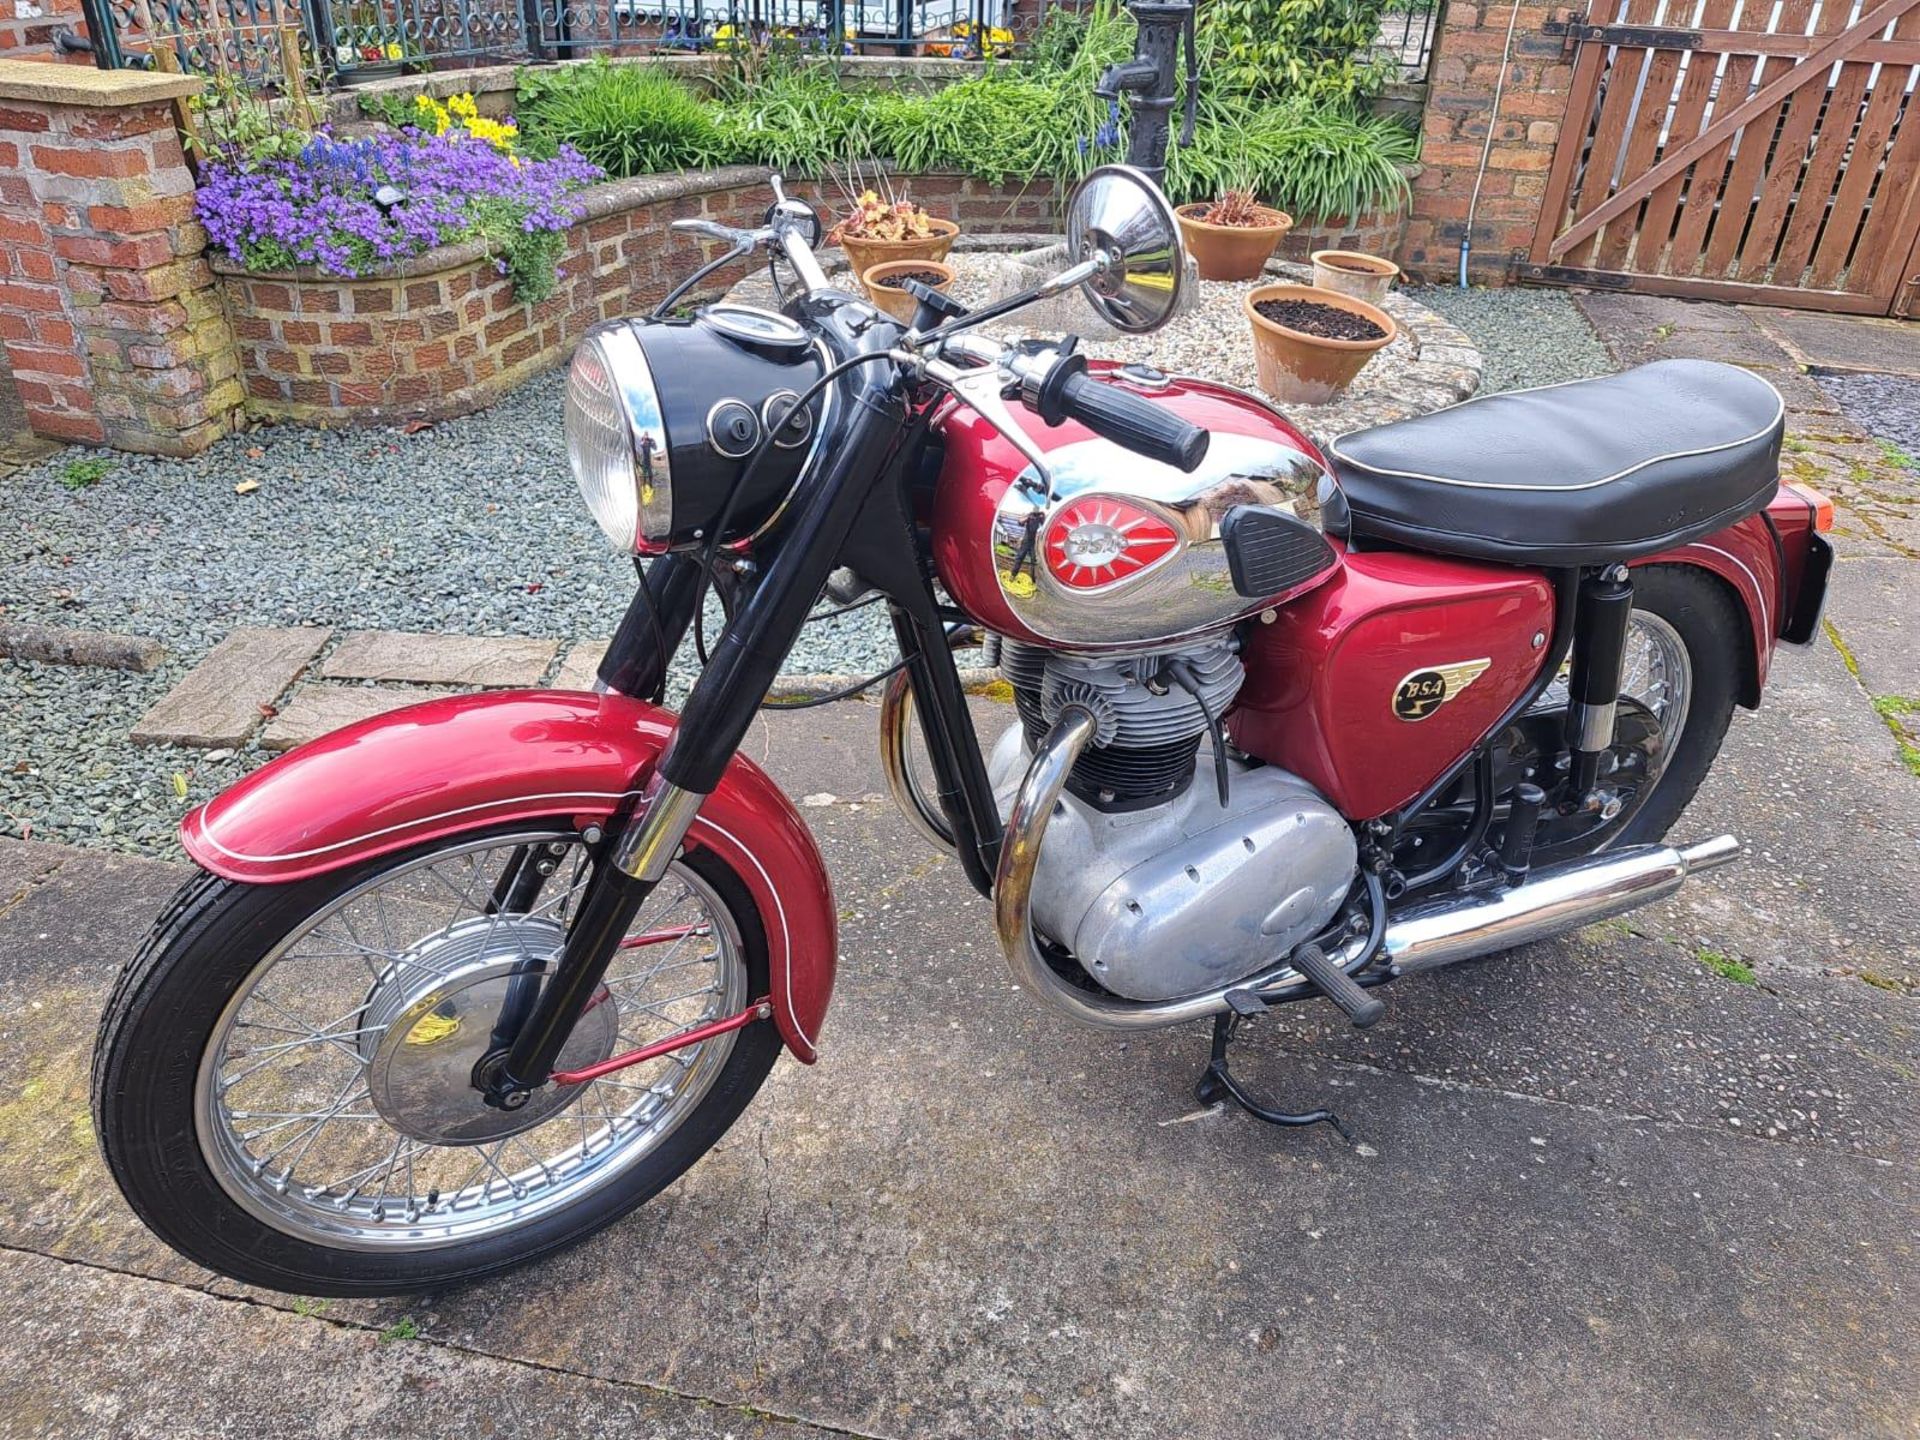 A 1964 BSA 500 TWIN MOTORCYCLE - ON A V5C, VENDOR STATES GOOD STARTER AND RUNNER, FROM A PRIVATE - Image 2 of 4